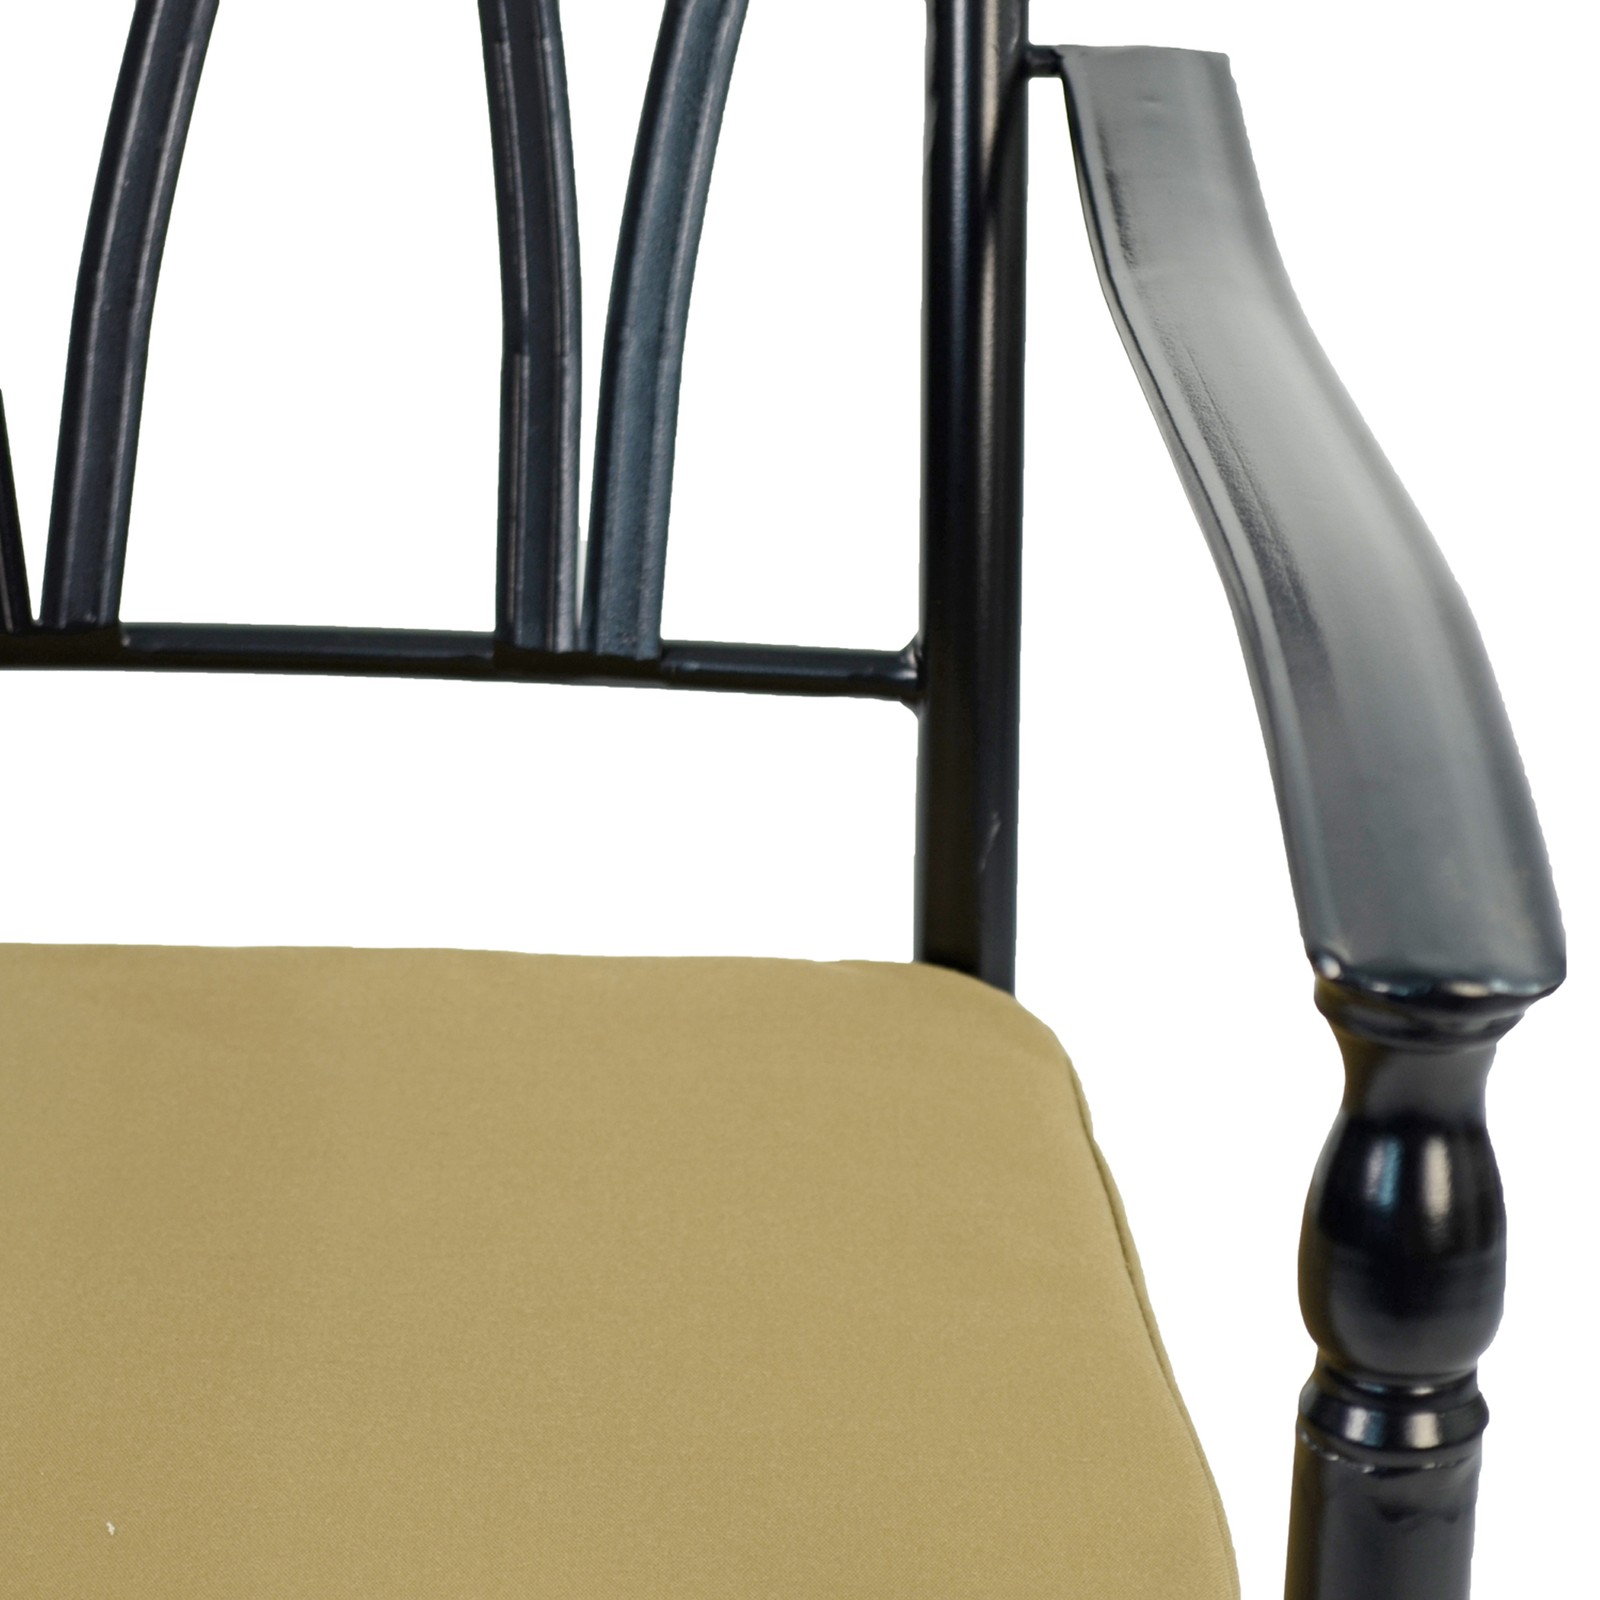 Byron Manor Ascot Garden Dining Chairs (Pack of 2) Chairs Byron Manor   